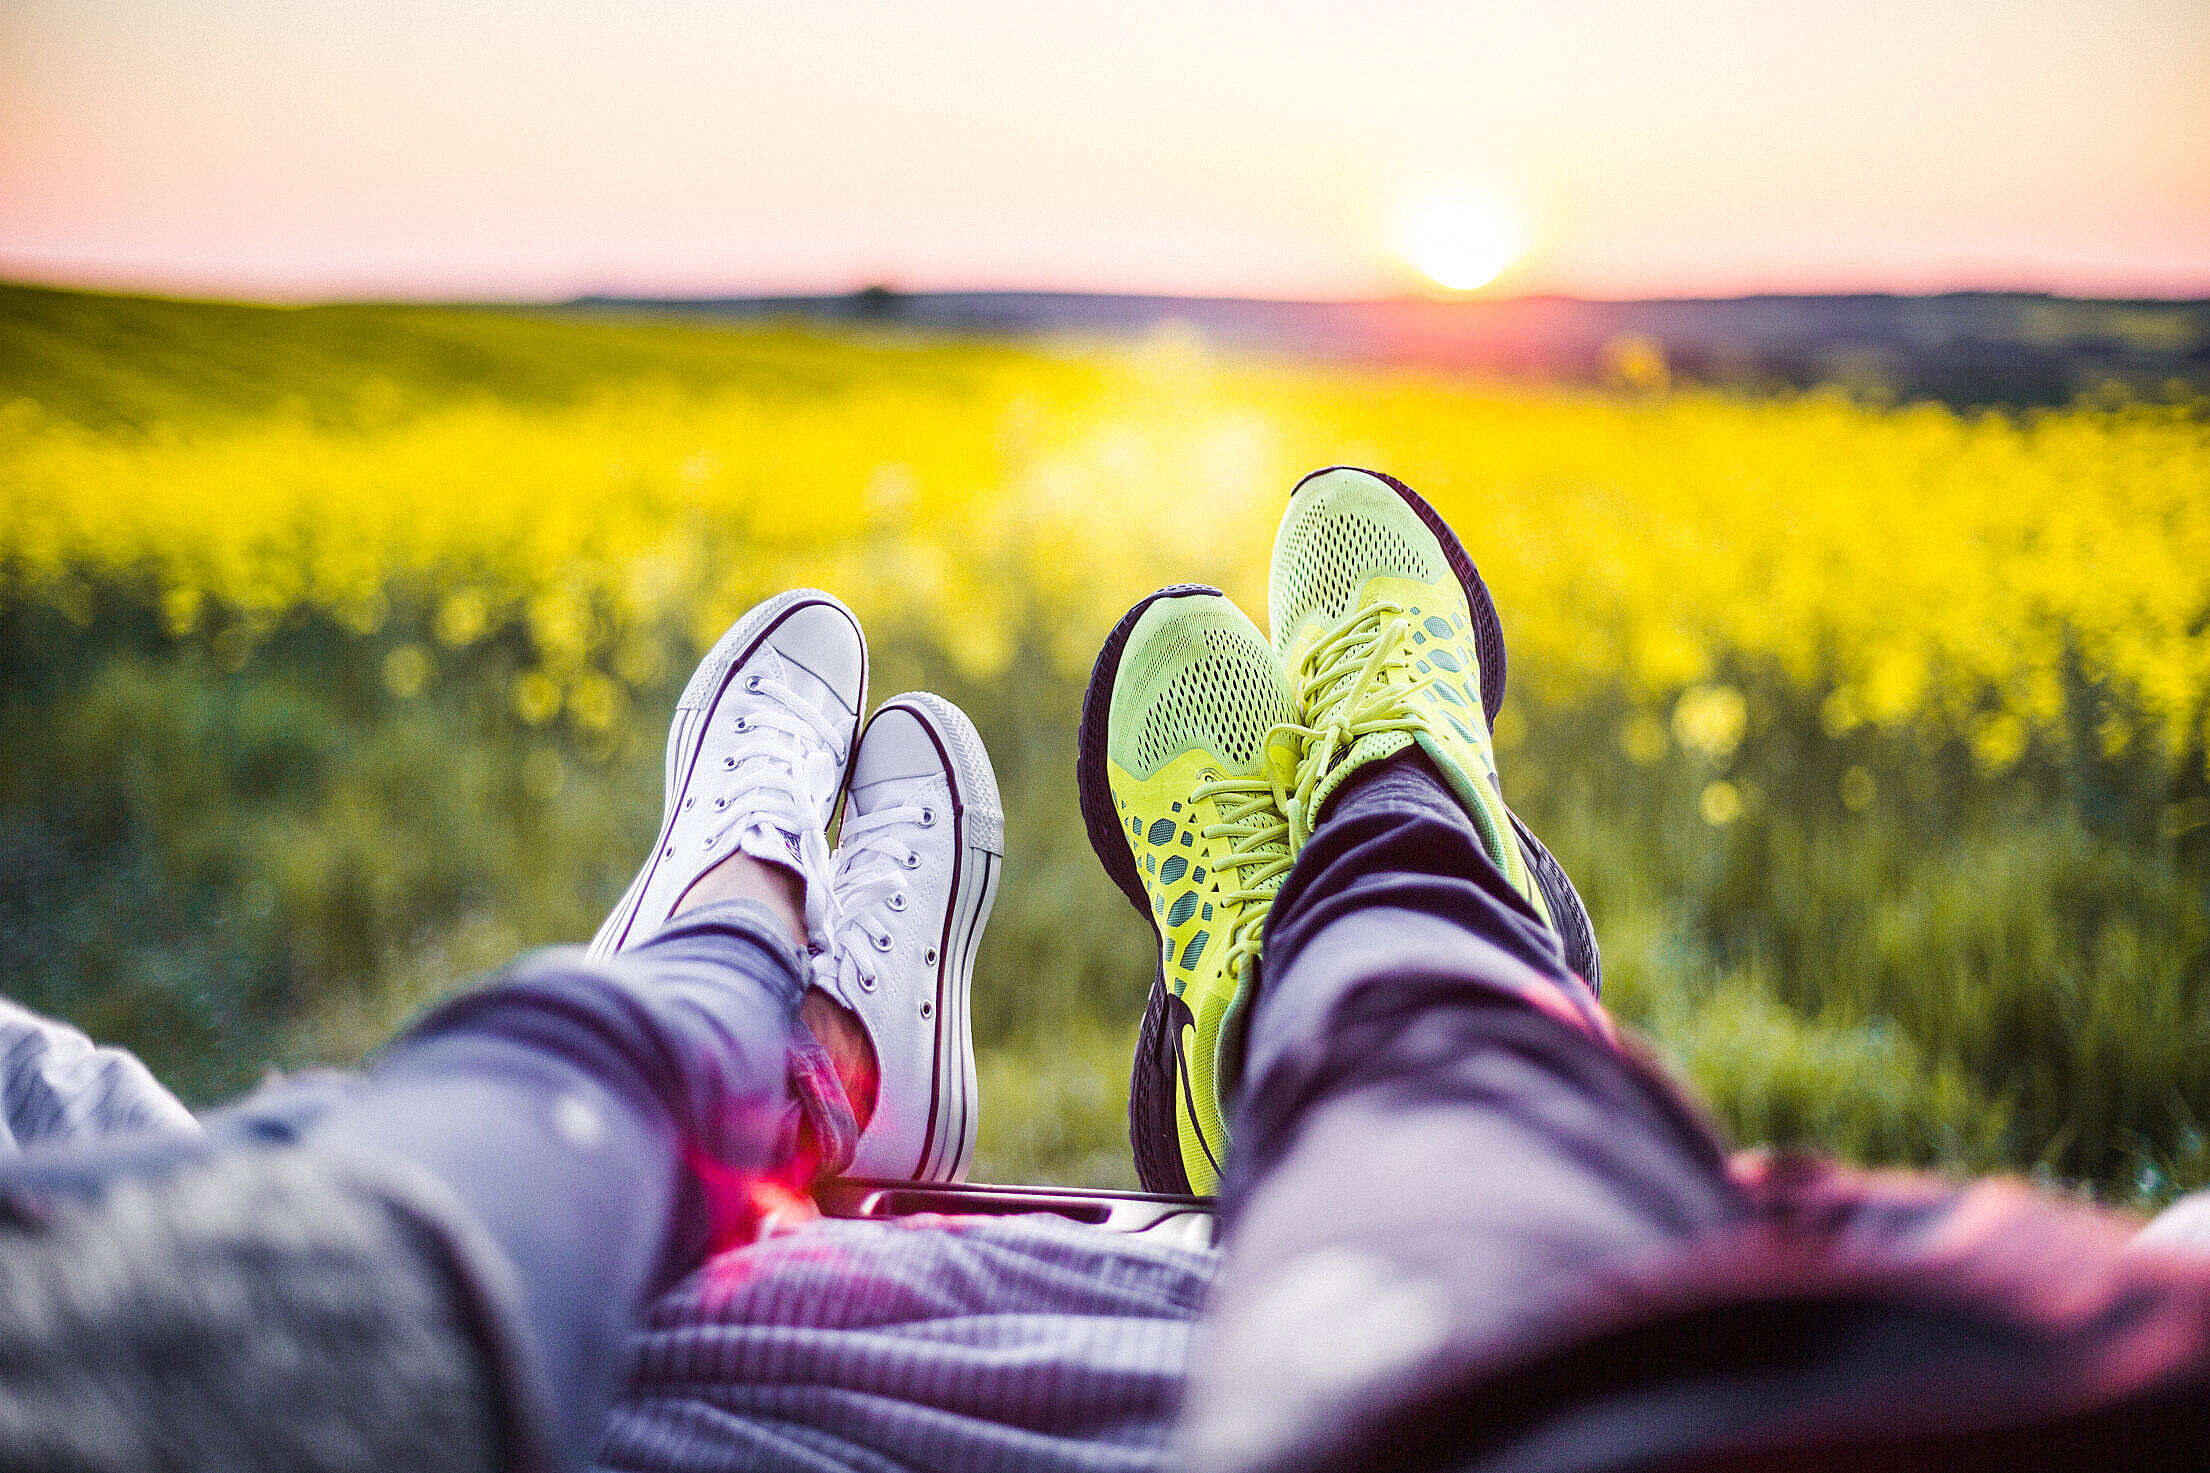 Young Couple Relaxing & Enjoying The Sunset from The Car Free Stock Photo